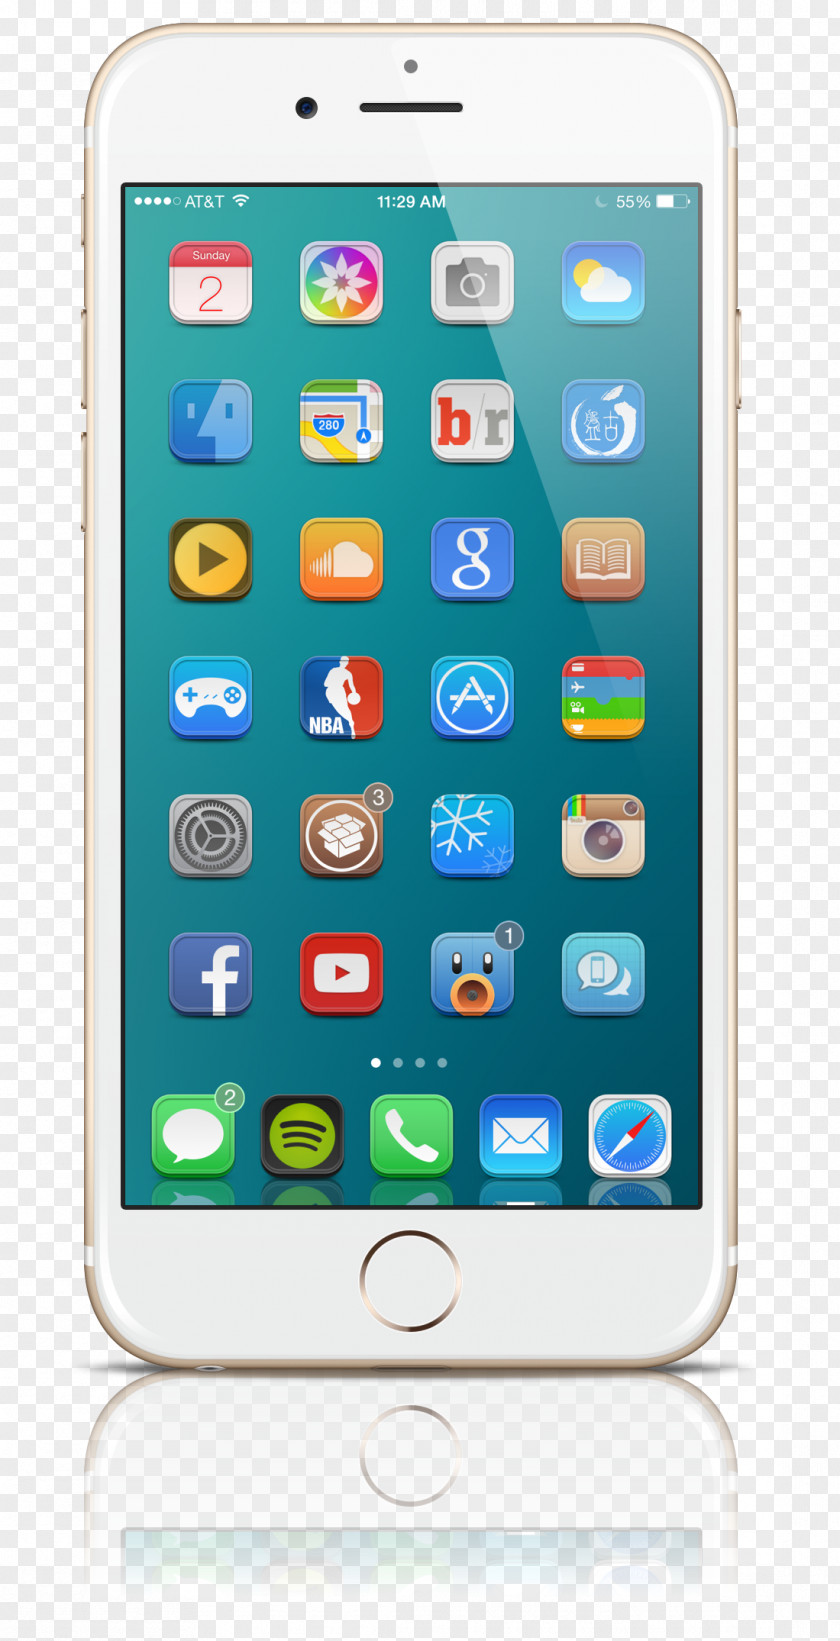 Iphone Apple IPhone 6s Plus Telephone Handheld Devices Awok PNG